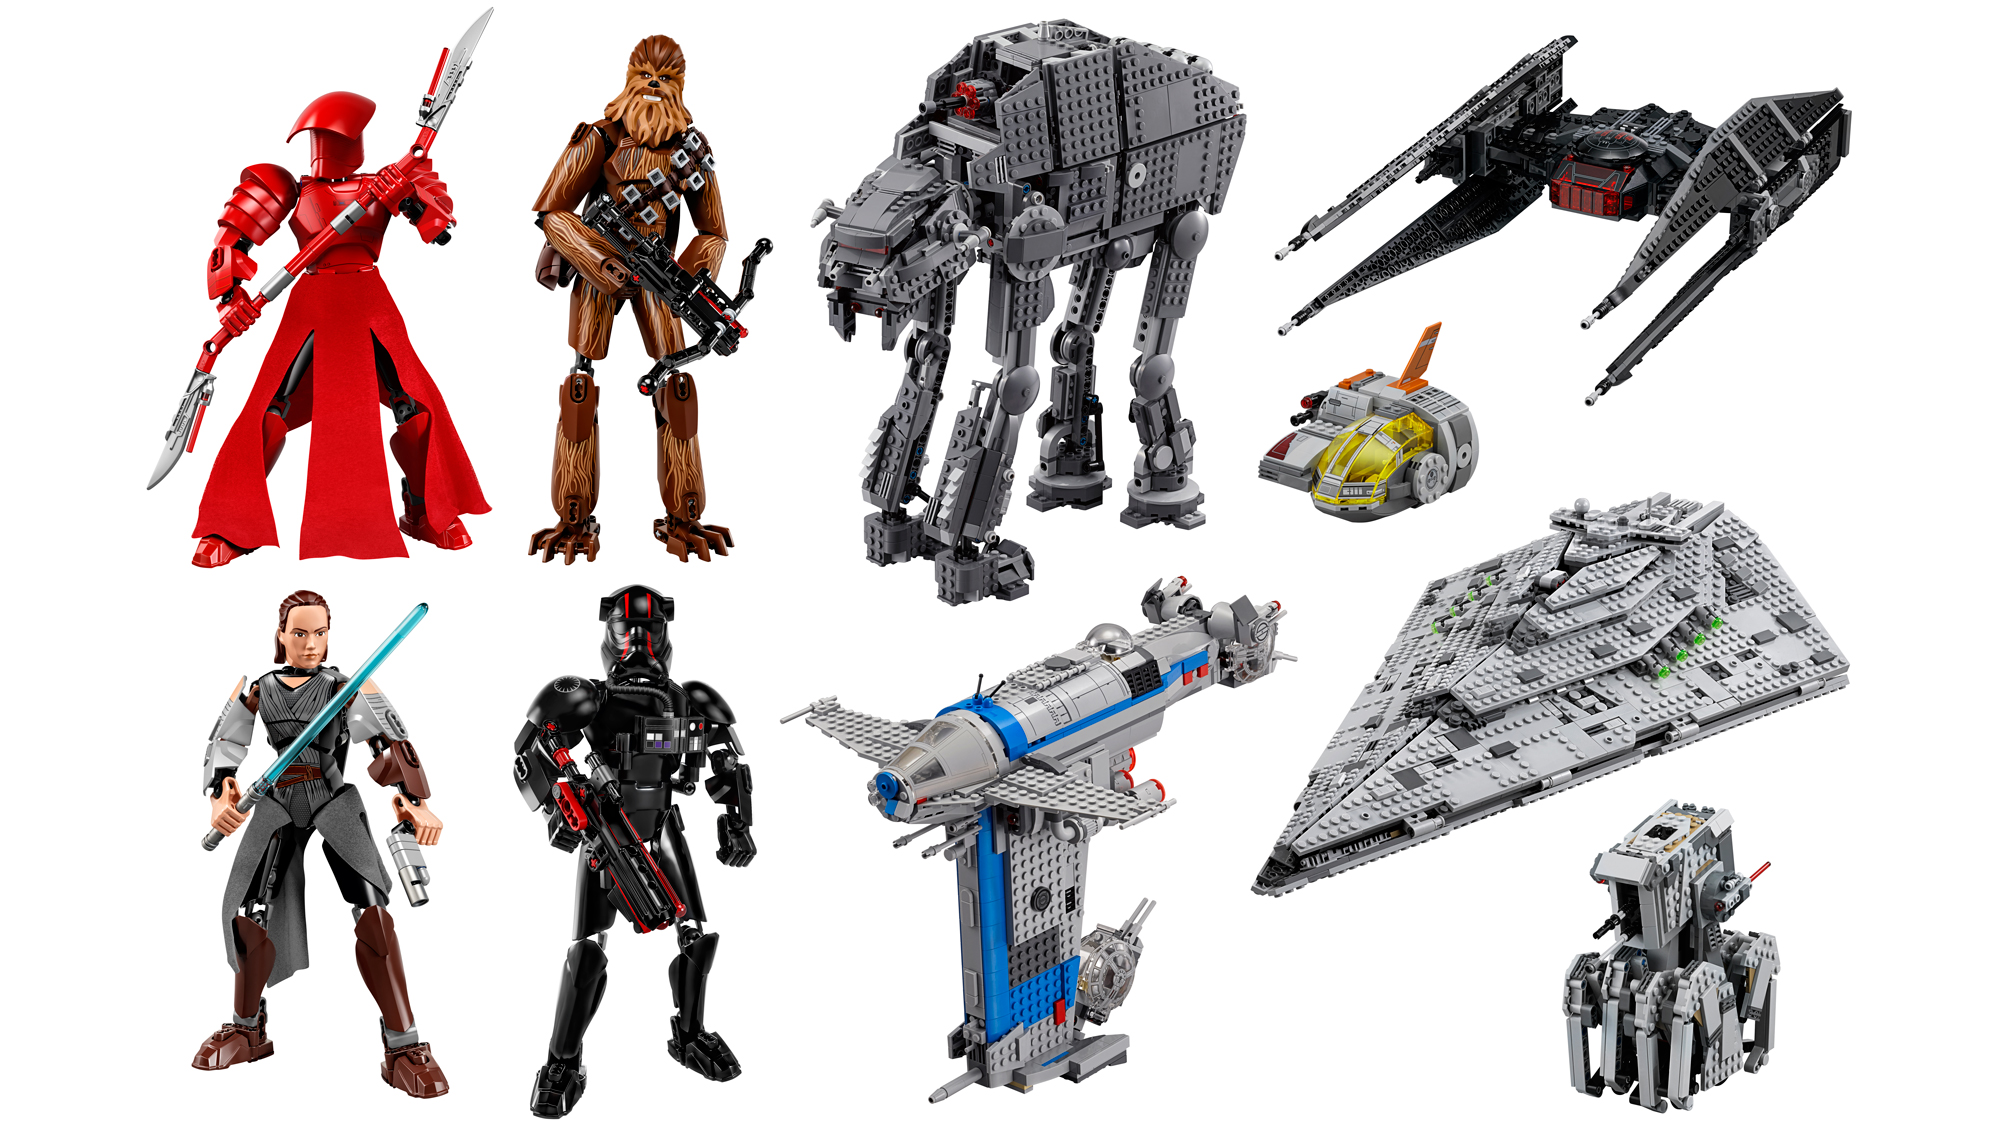 Star Wars: The Last Jedi Hasbro action figures revealed on Force Friday